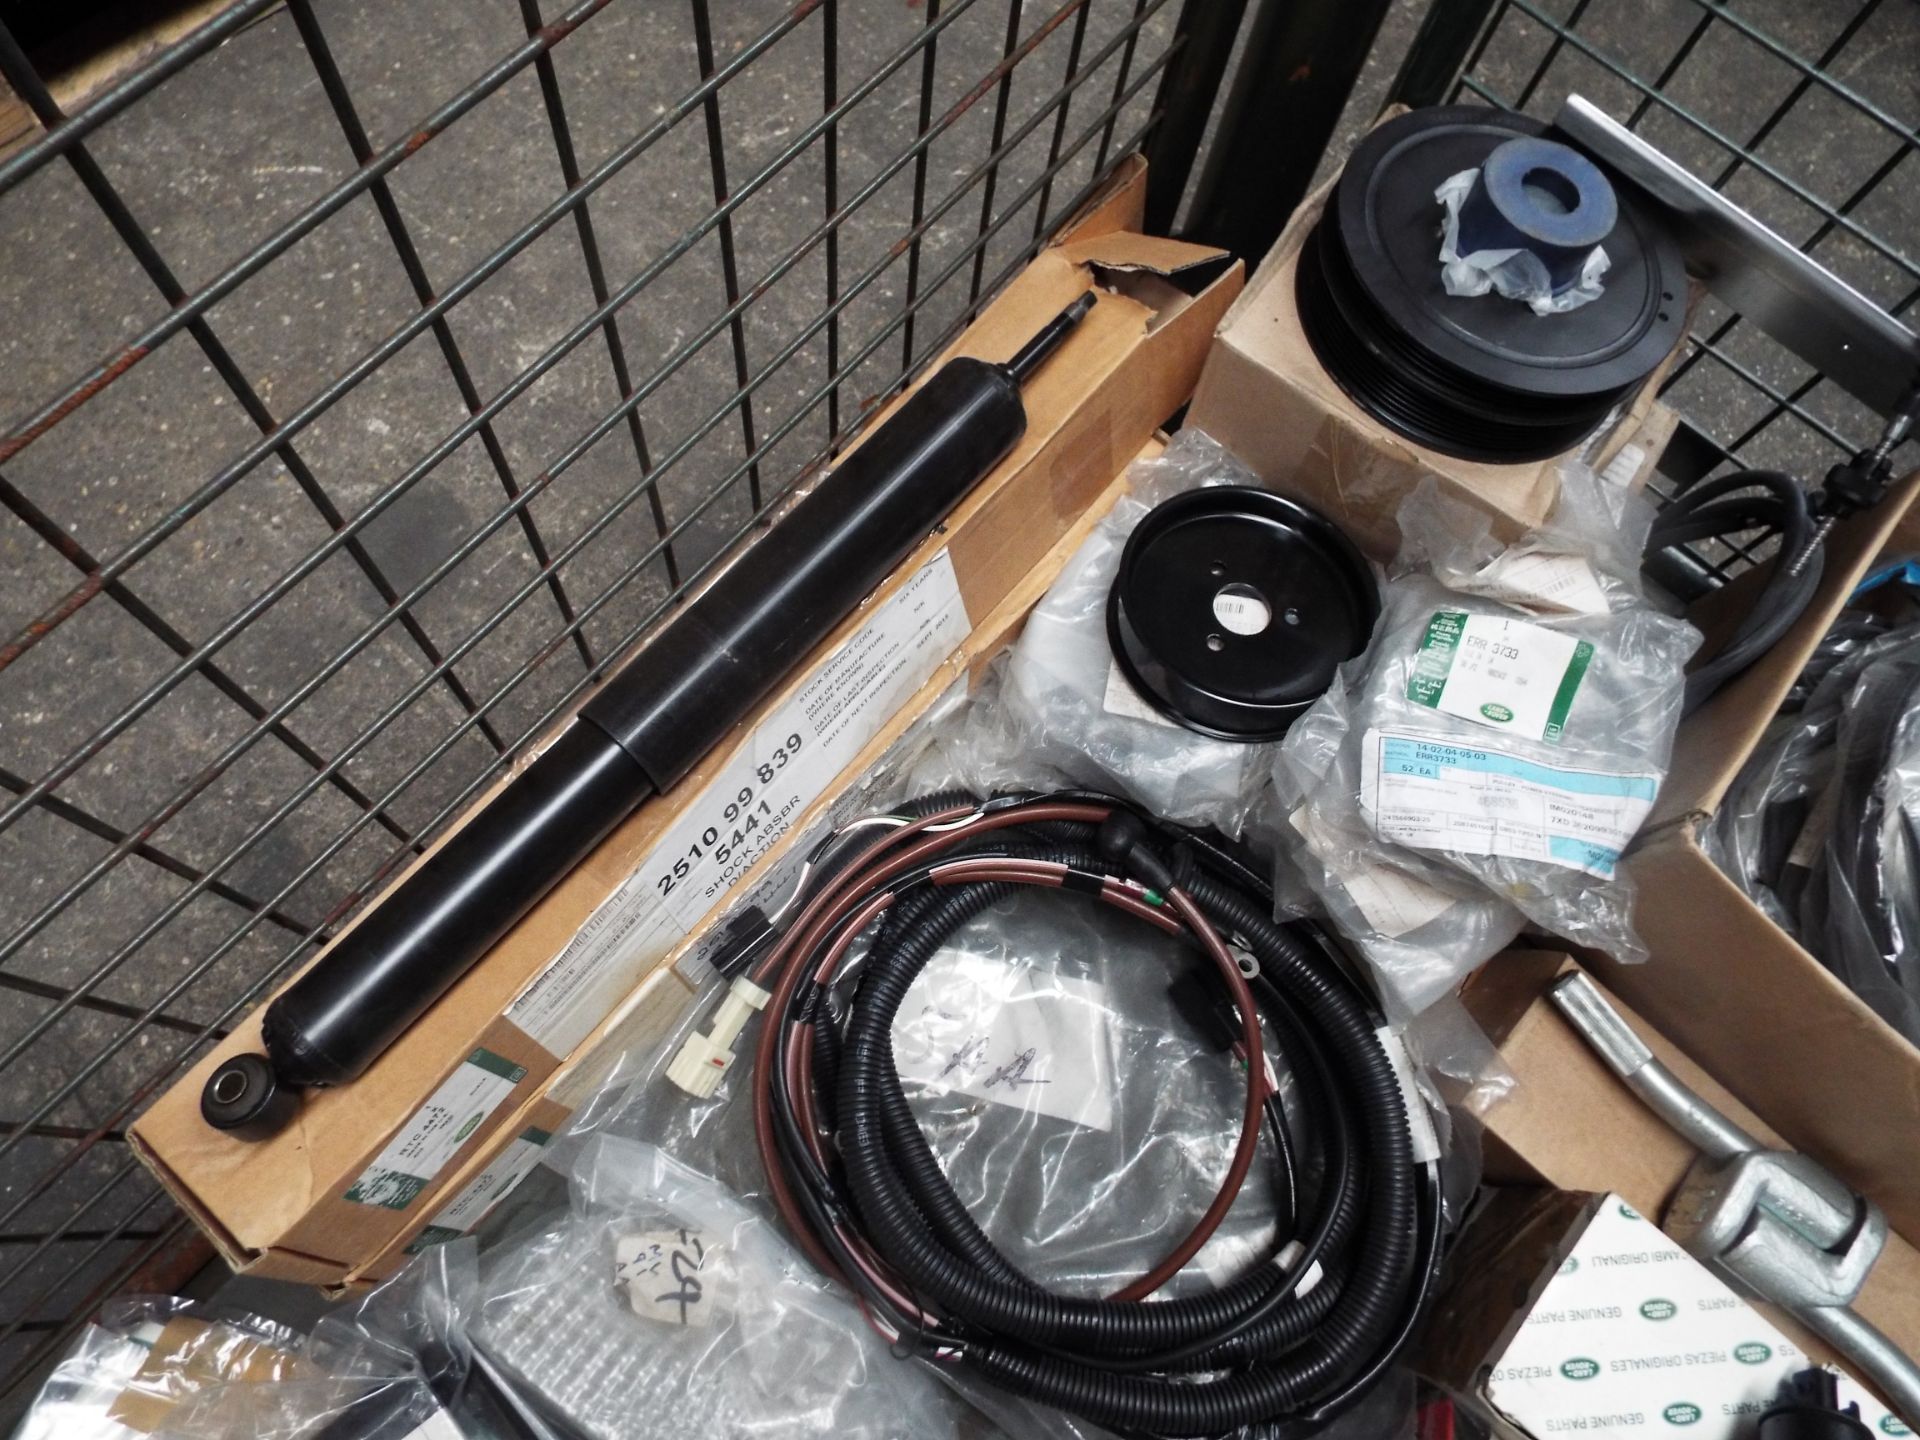 Mixed Stillage of Land Rover Parts inc Mirrors, Pulleys, Shock Absorbers, Lamps etc - Image 2 of 10